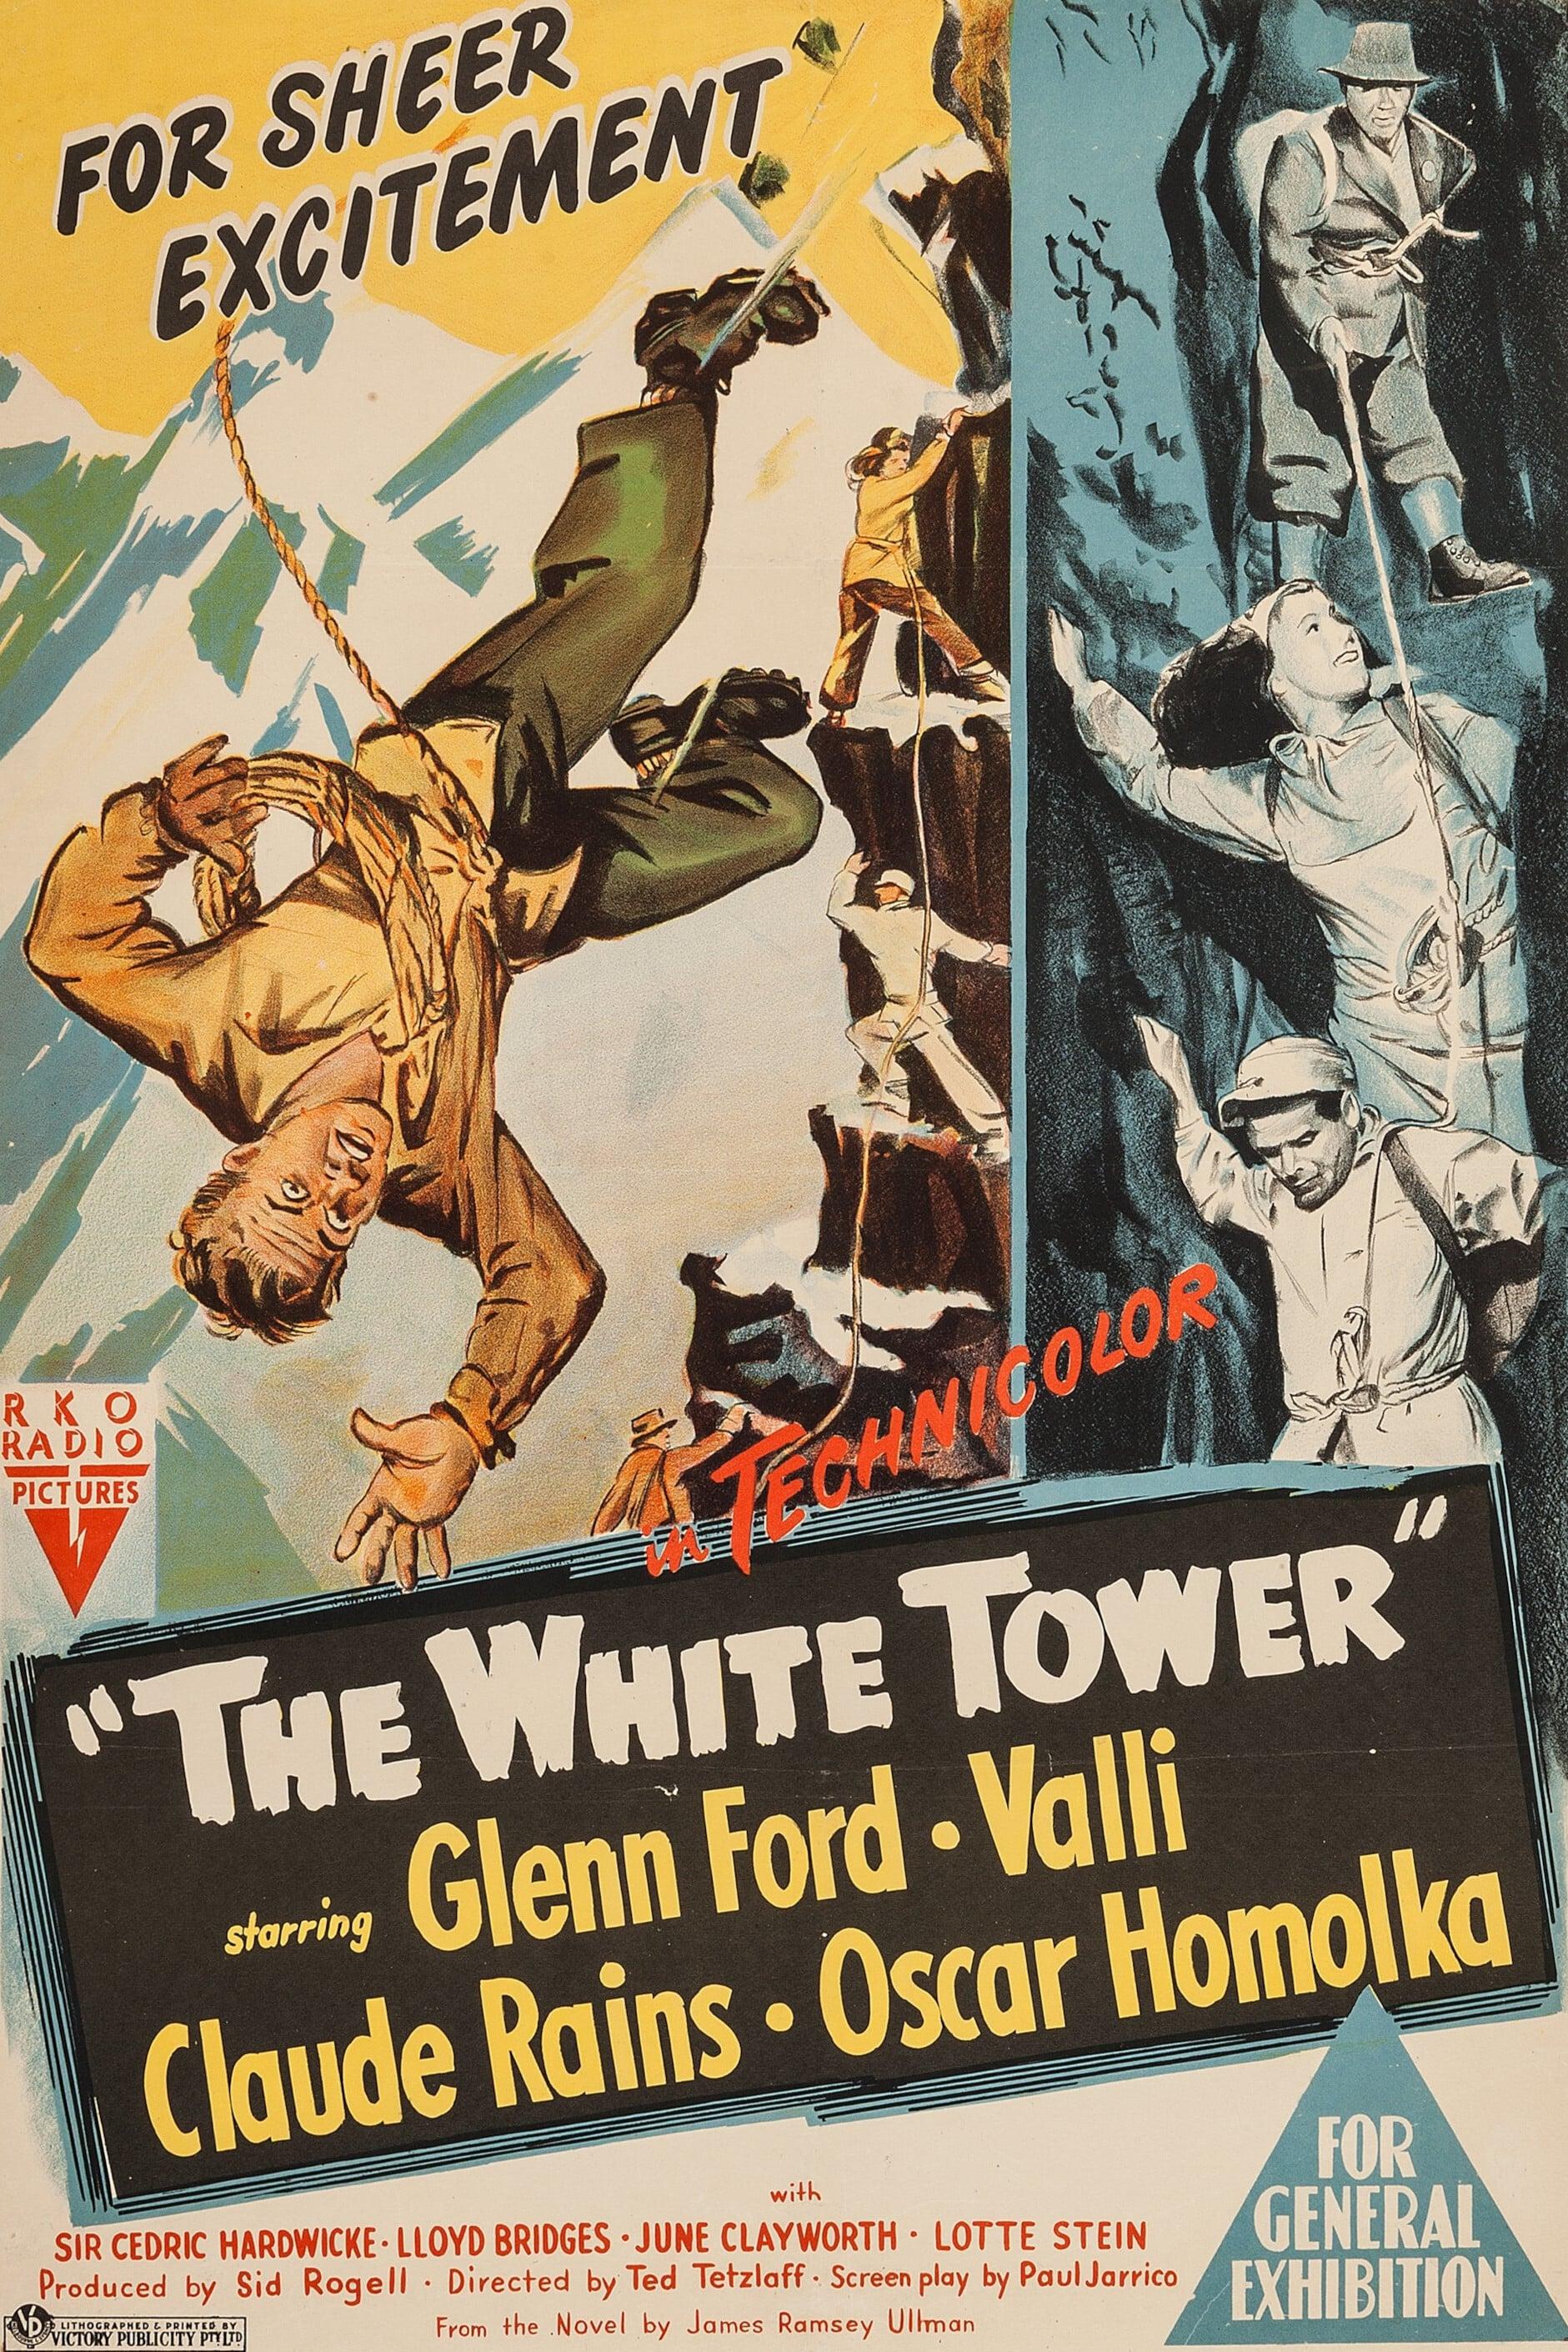 The White Tower poster